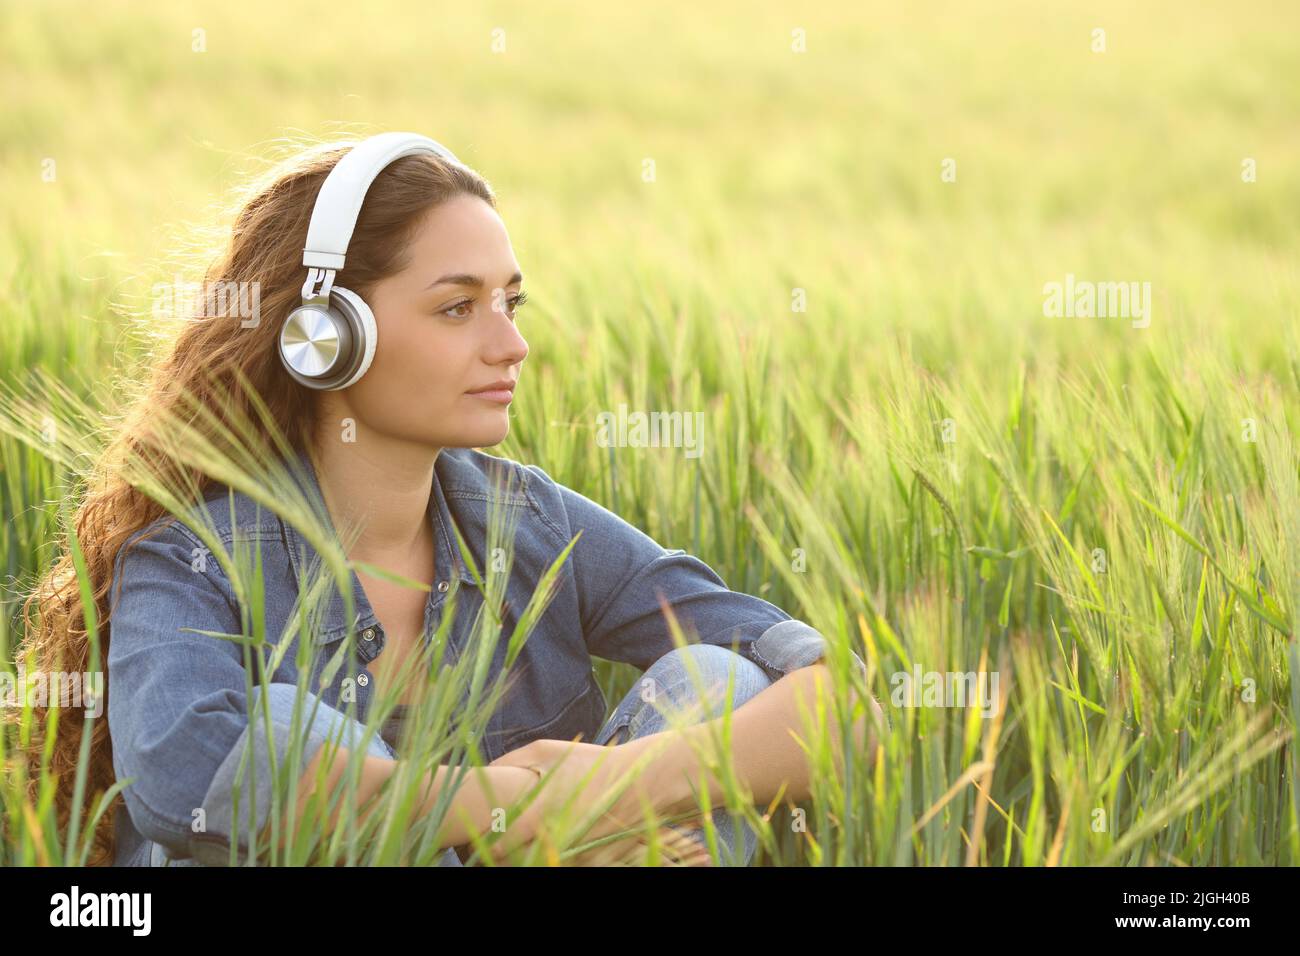 Pensive woman listening audio with wireless headphones looking away in a wheat field Stock Photo